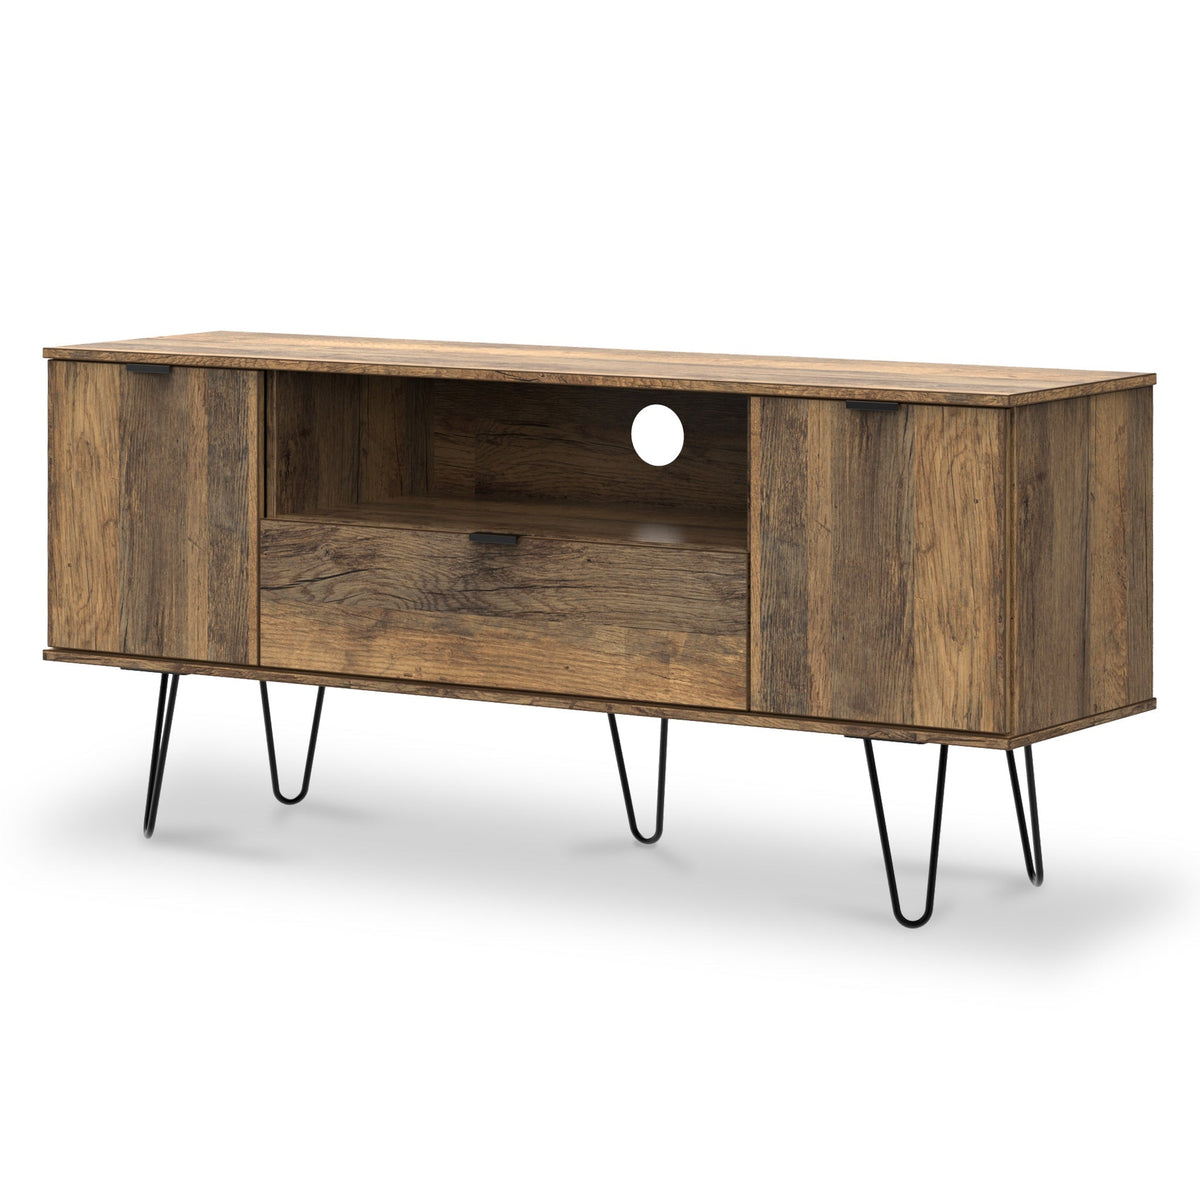 Moreno Rustic Oak Wide TV Unit with Black Hairpin Legs and 2 cupboards